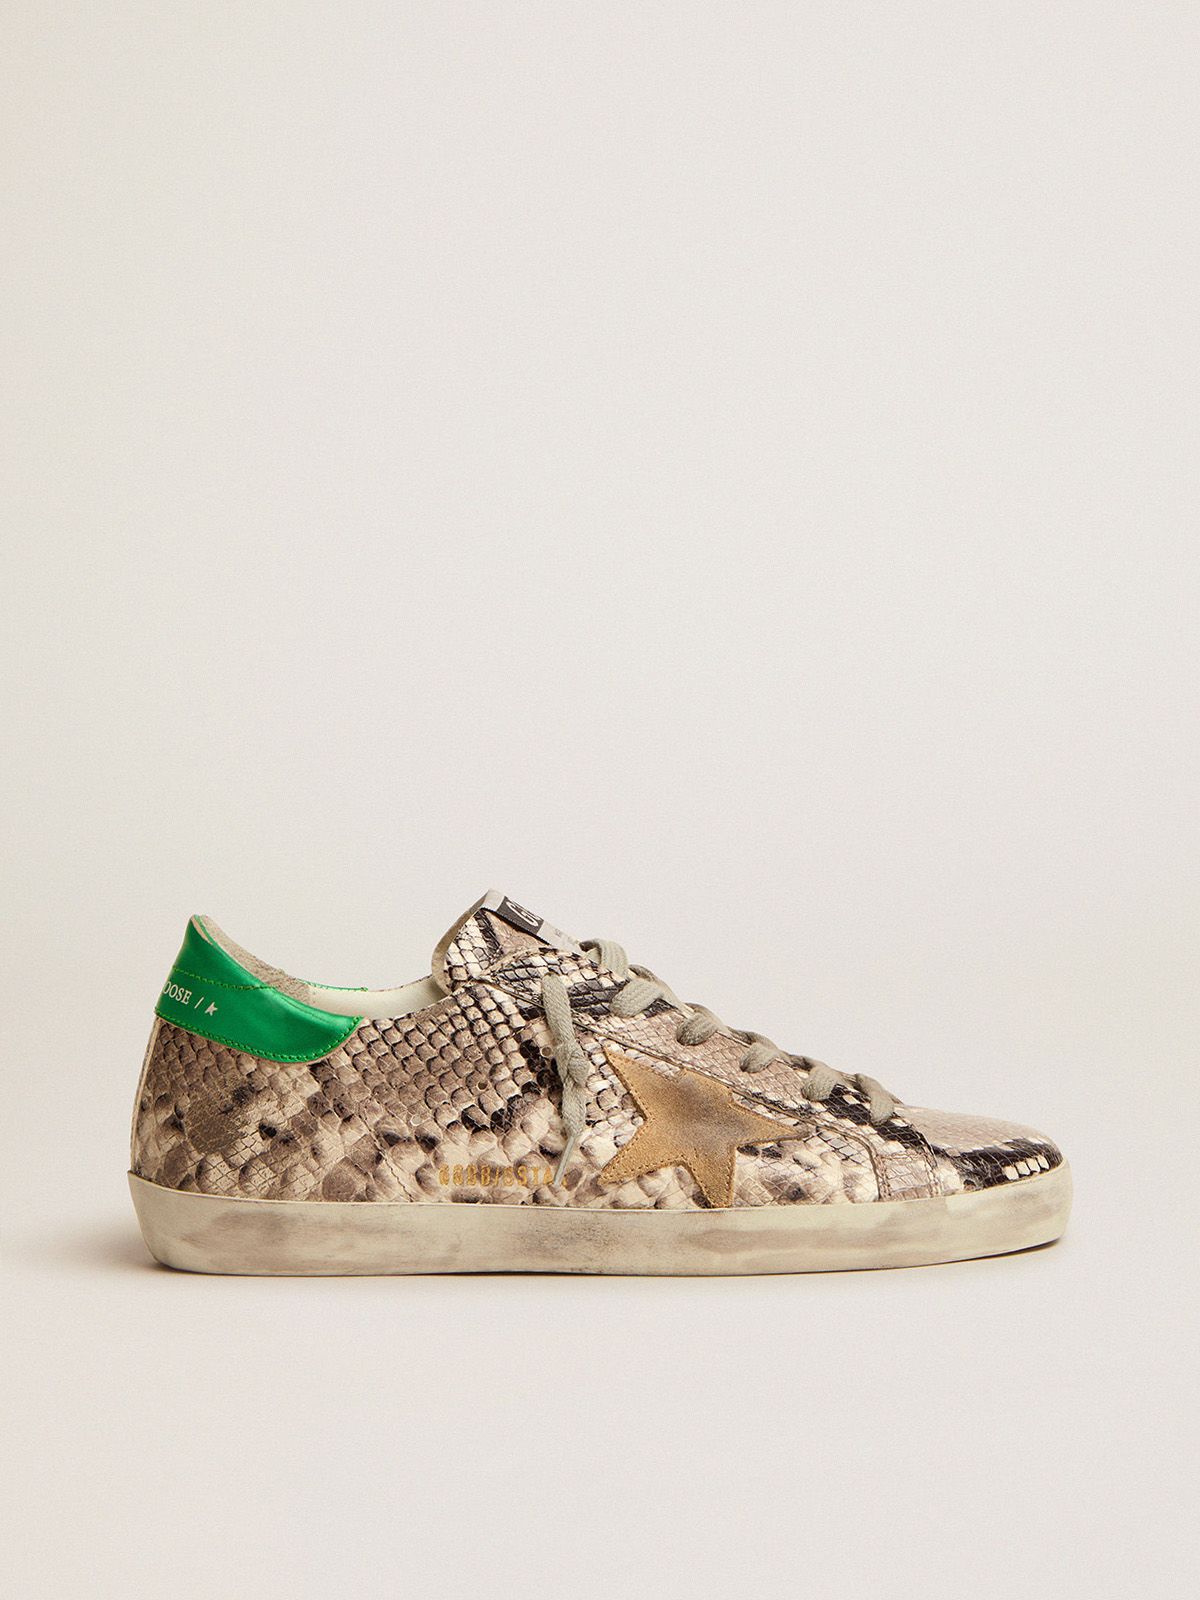 golden goose sneakers snake-print and Super-Star LTD upper laminated leather heel green tab with